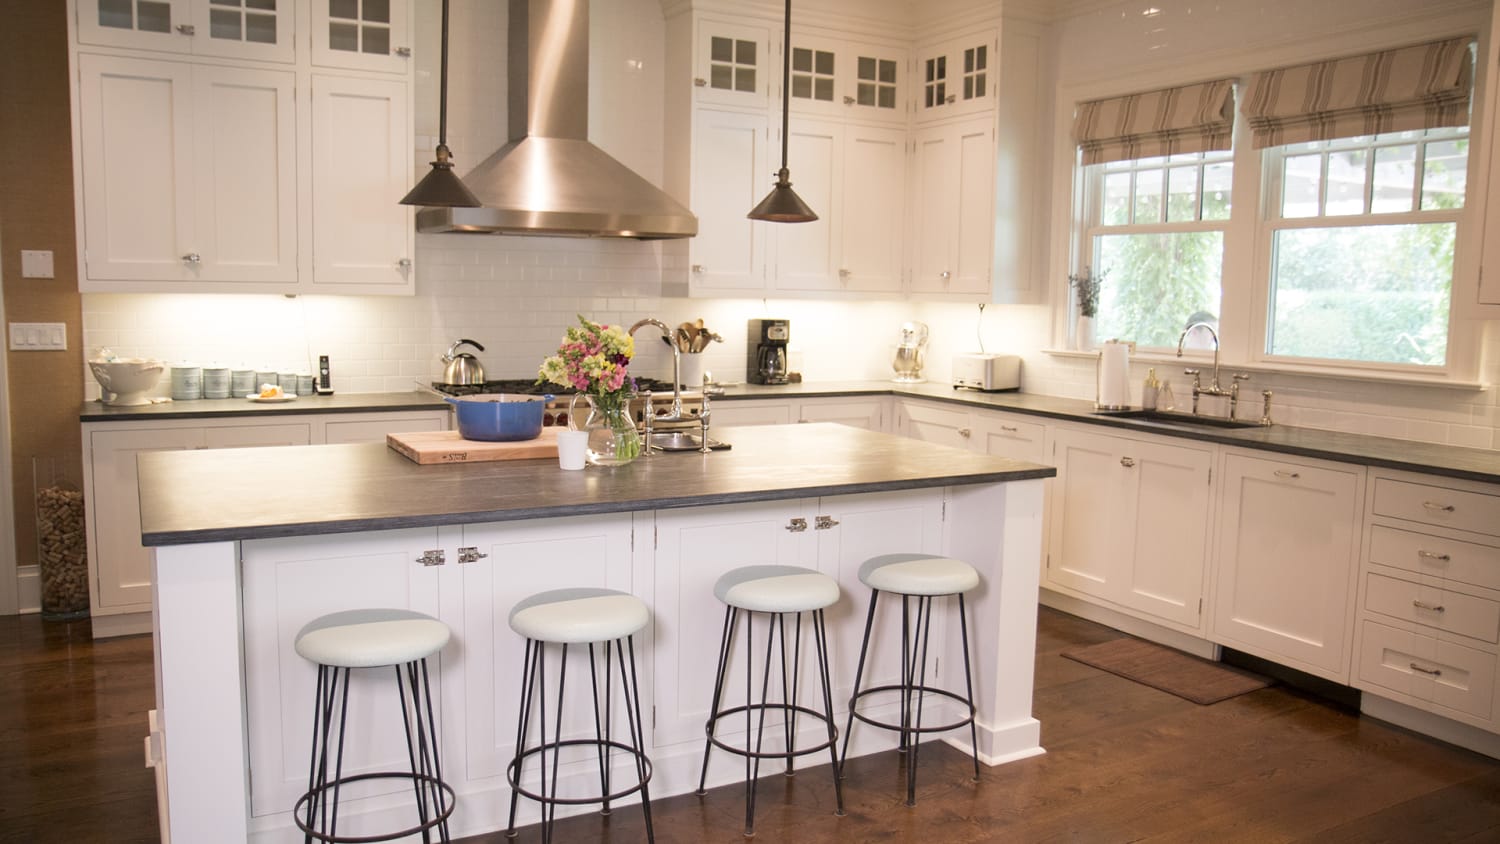 Katie Lee's kitchen: See inside her Water Mill home